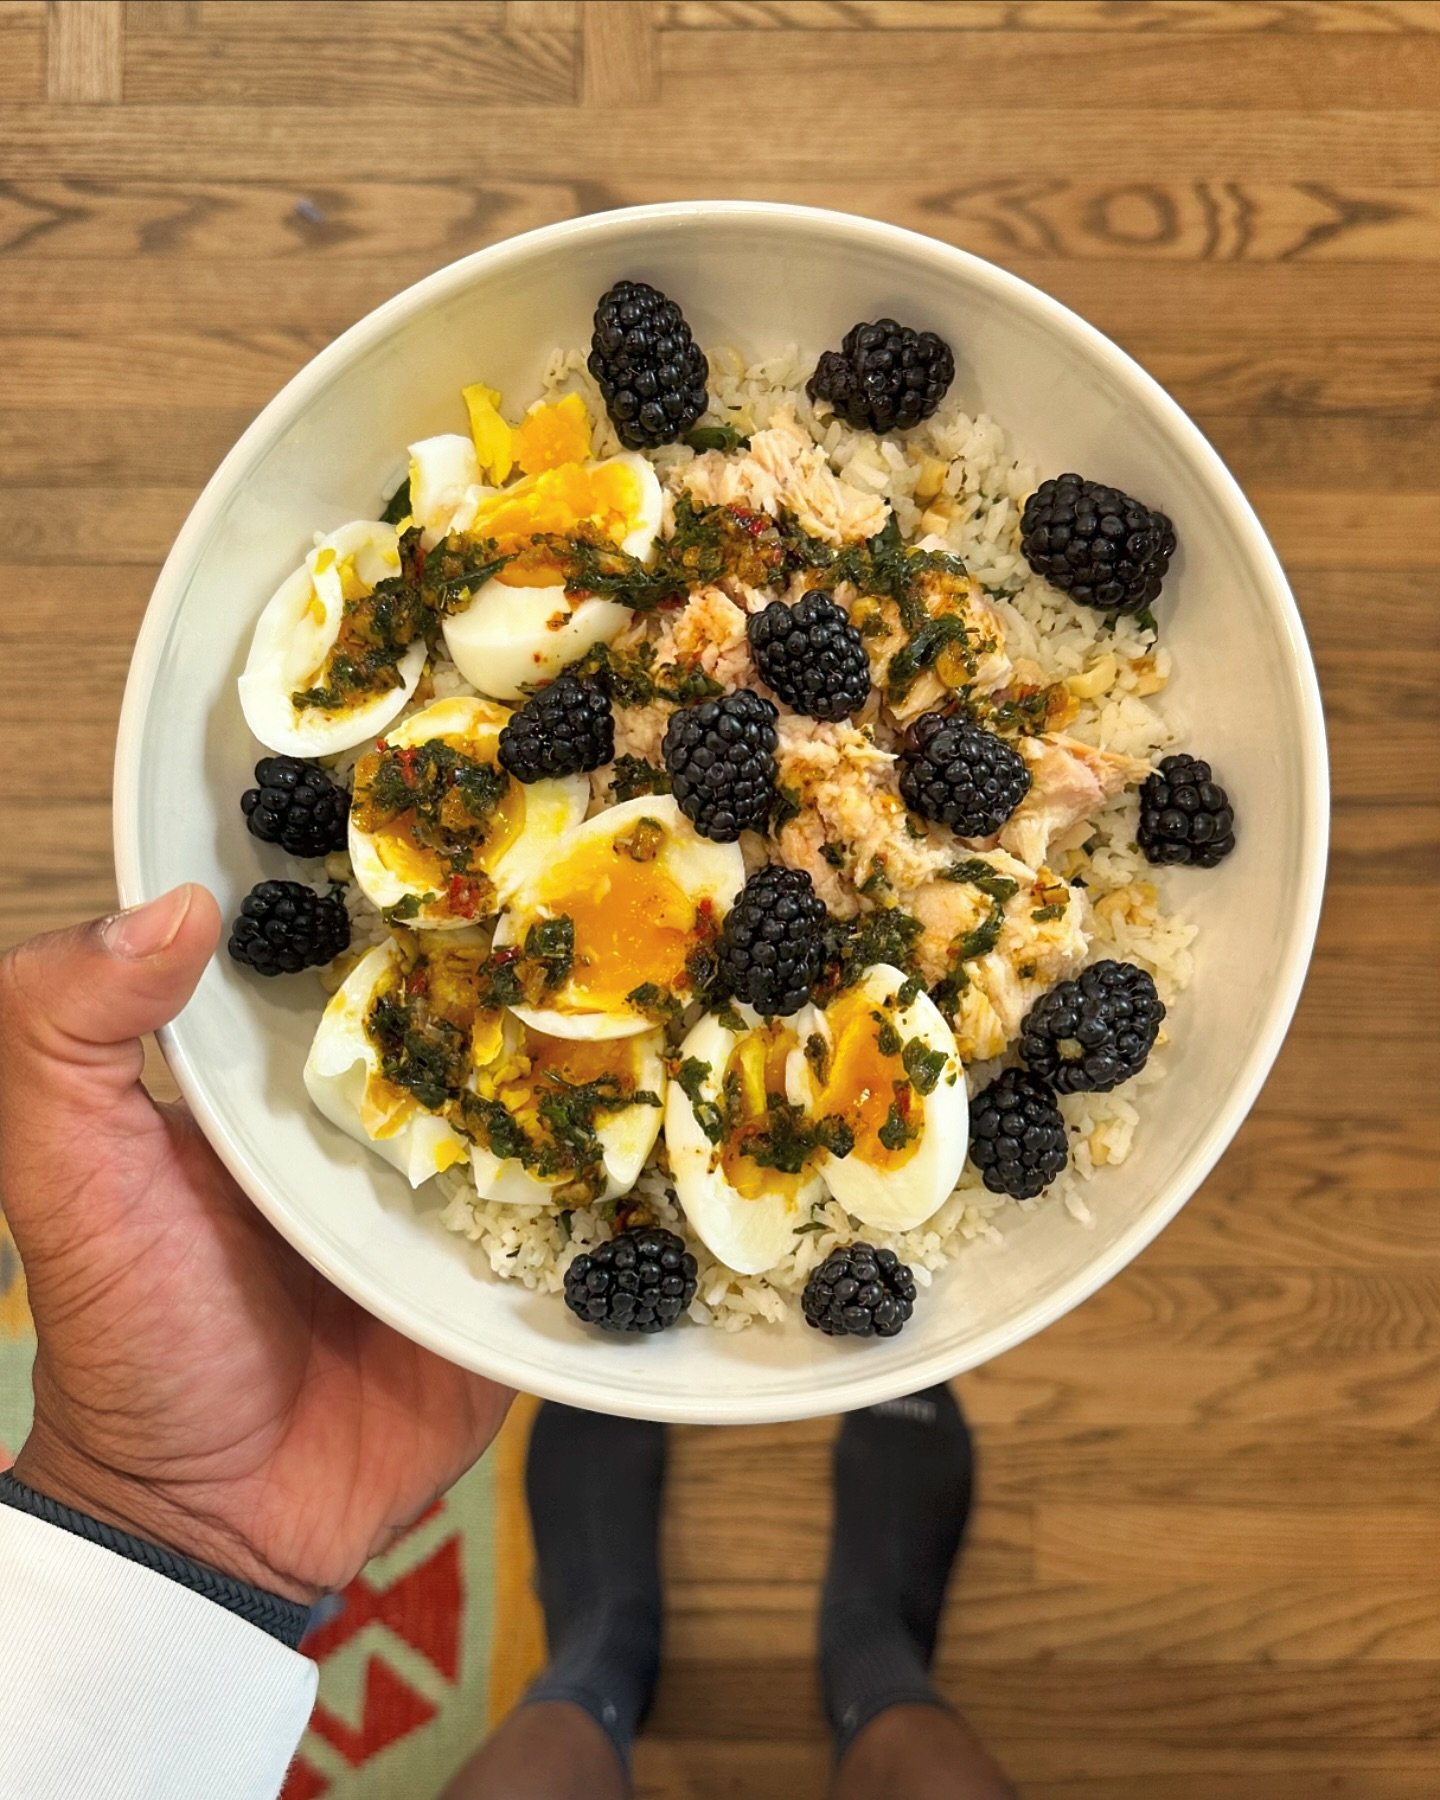 celery seed + ramp fried rice topped with jammy eggs, blackberries, tuna, and a ramp chimichurri. a millennial hudson valley weightlifter who grew up in a Gullah Geechee kitchen&rsquo;s dream🥹💚🩵🩷🤍🤎

#WesSlayCooks 

(tagging @kreebalicious for h